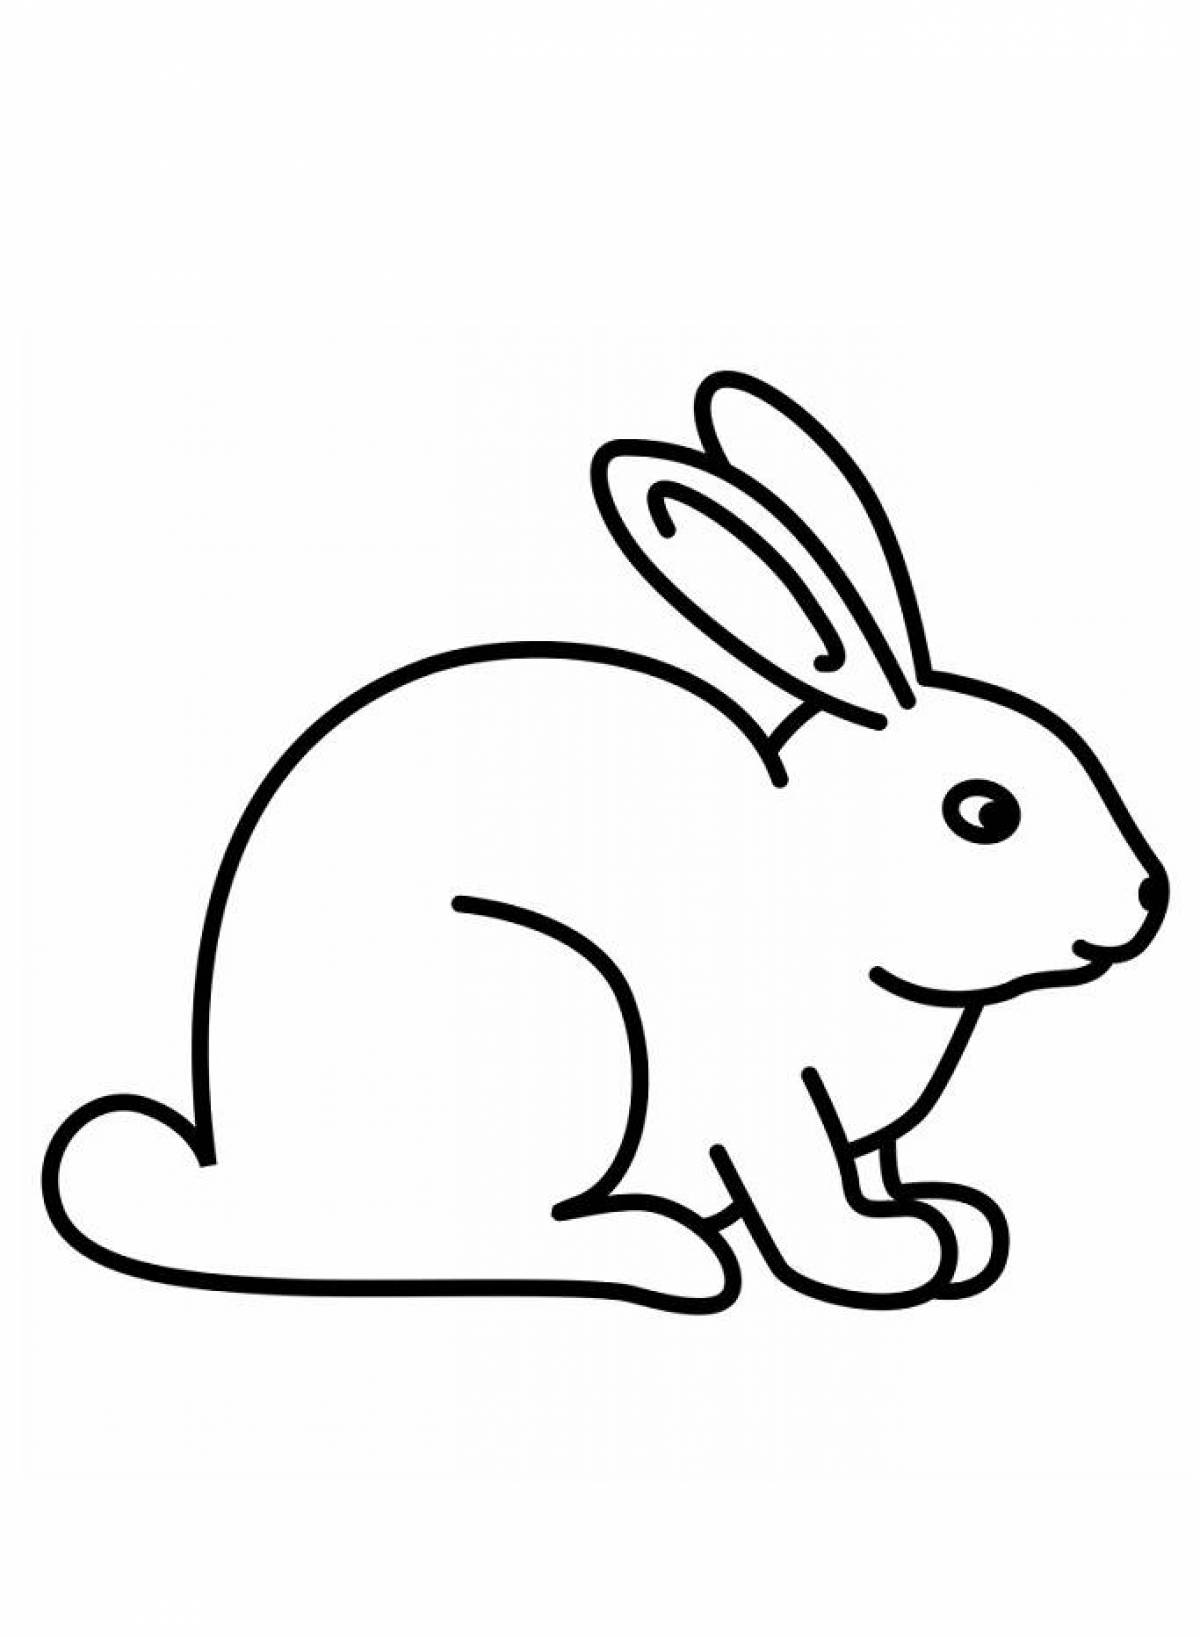 Live coloring page bunny picture